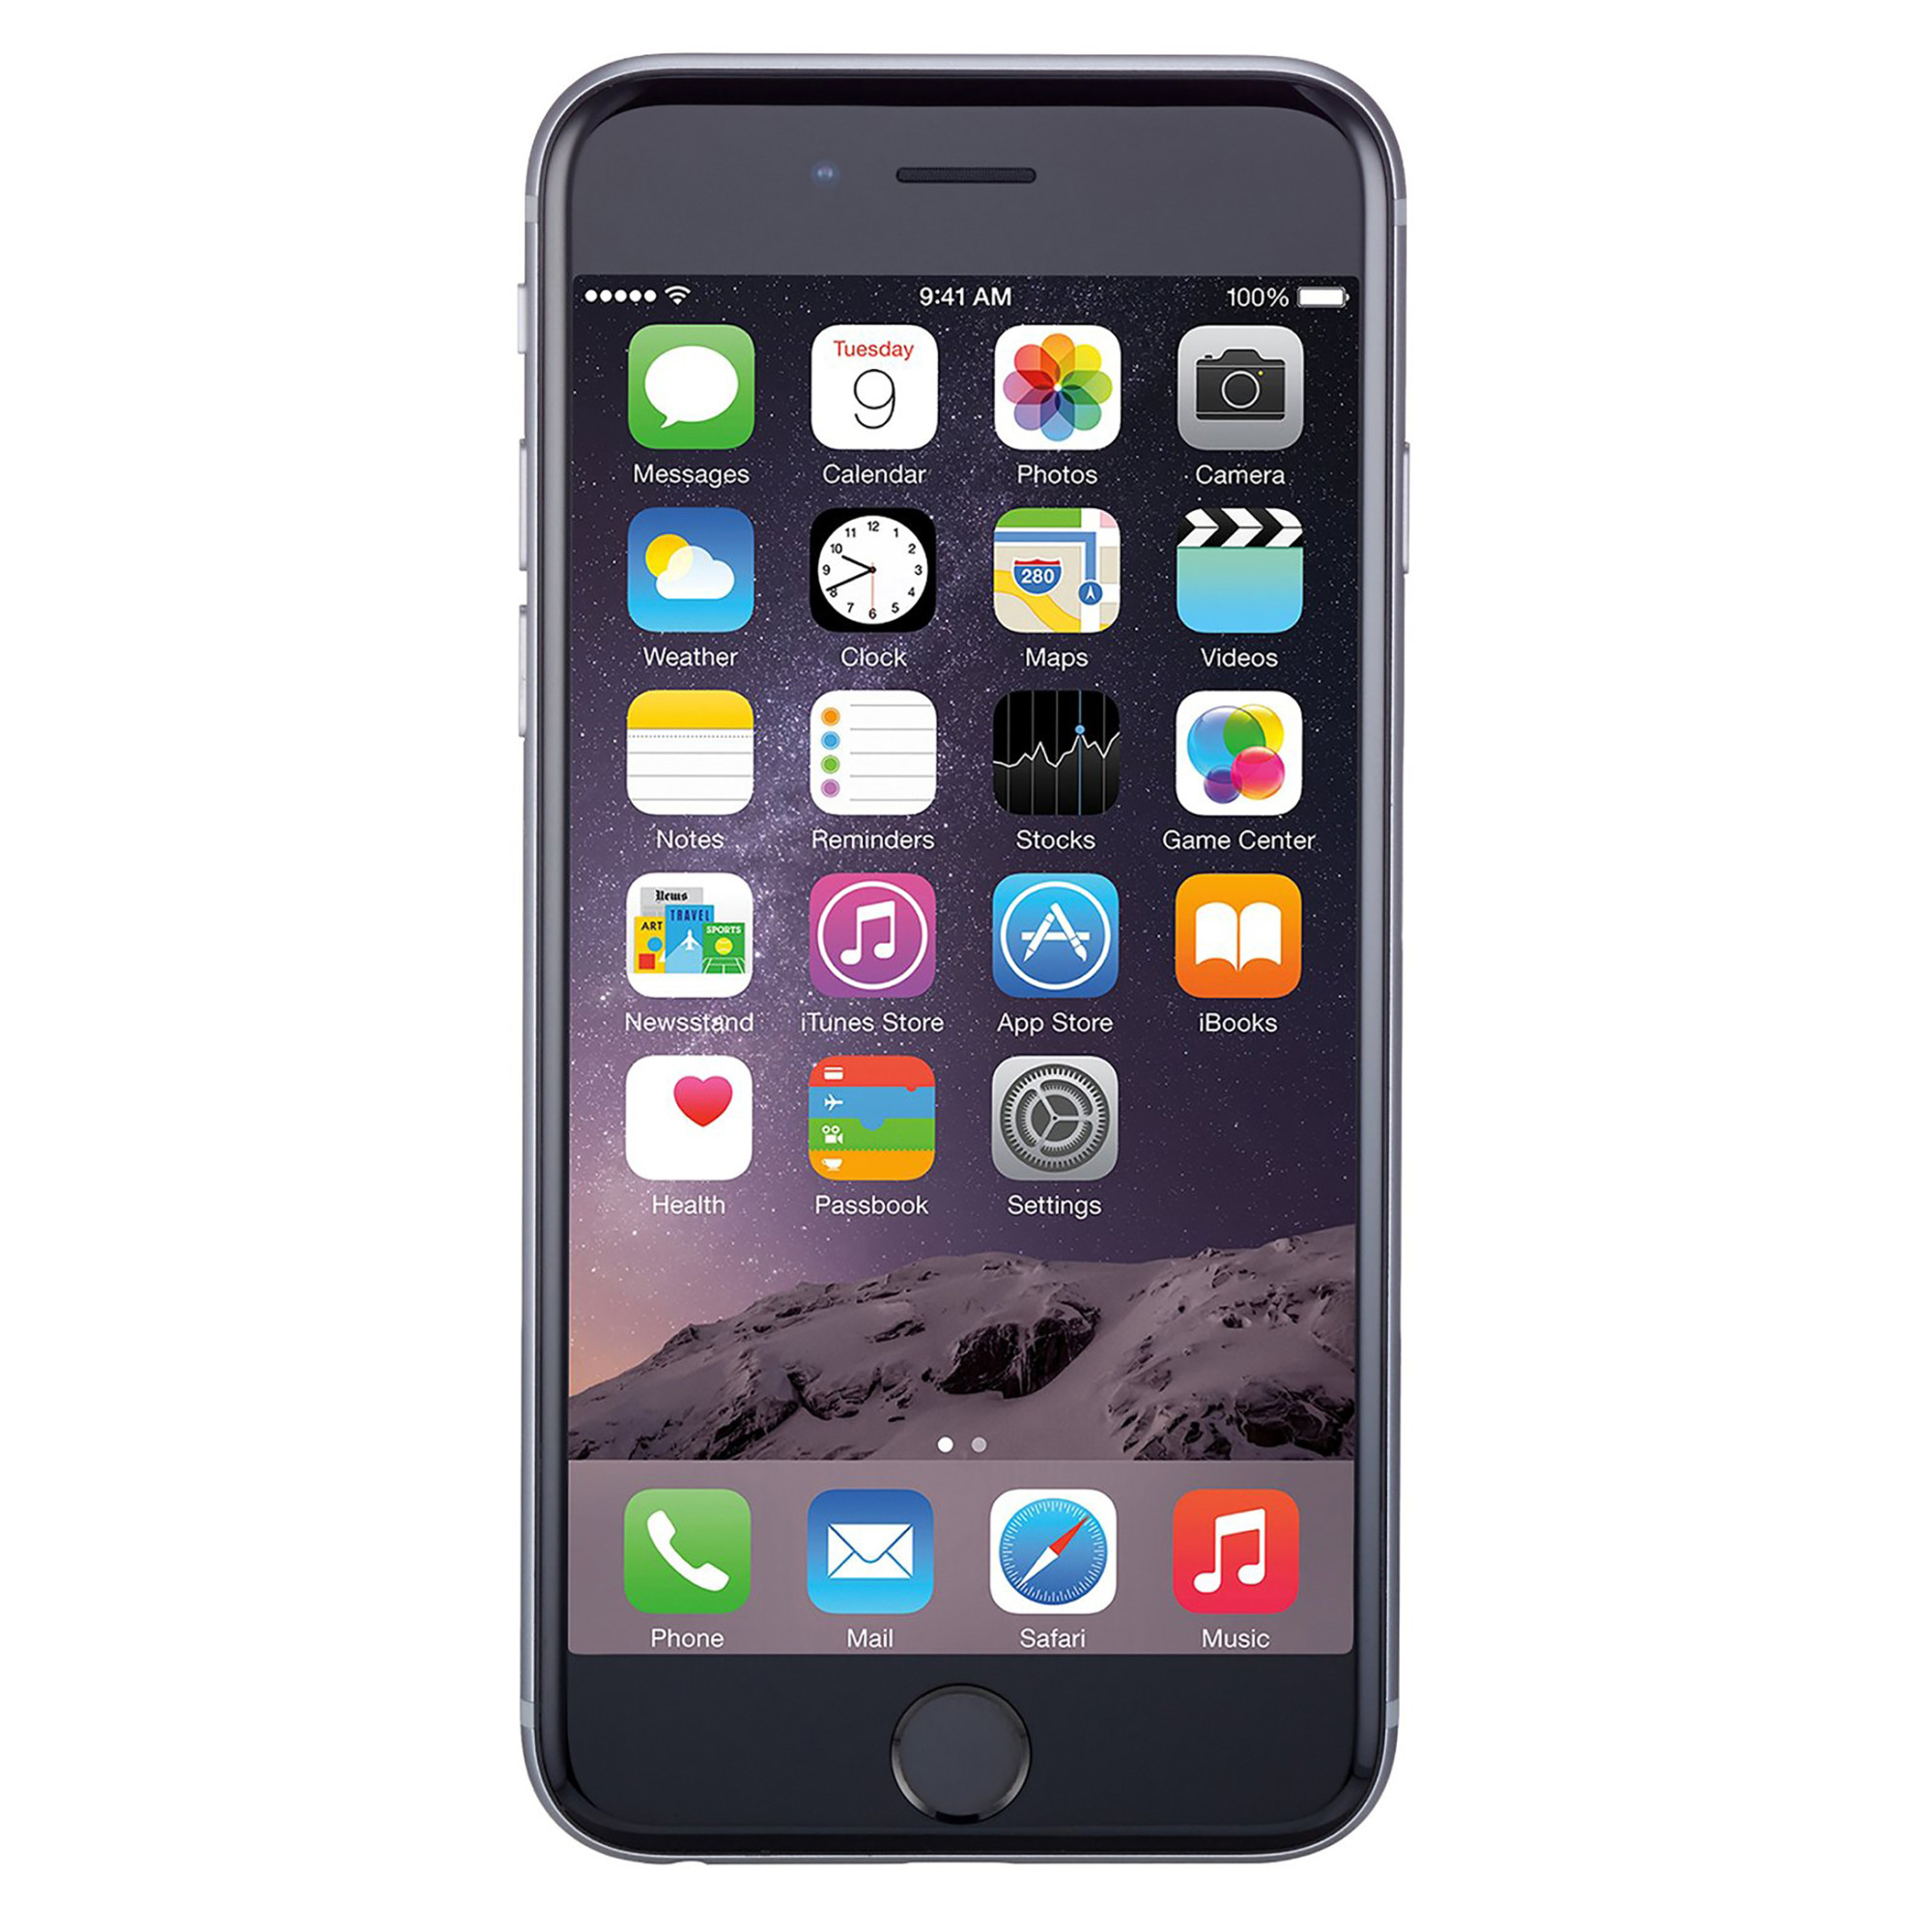 Apple iPhone 6 Plus 64GB Unlocked GSM Phone with 8MP Camera - Space Gray (Used) - image 1 of 3